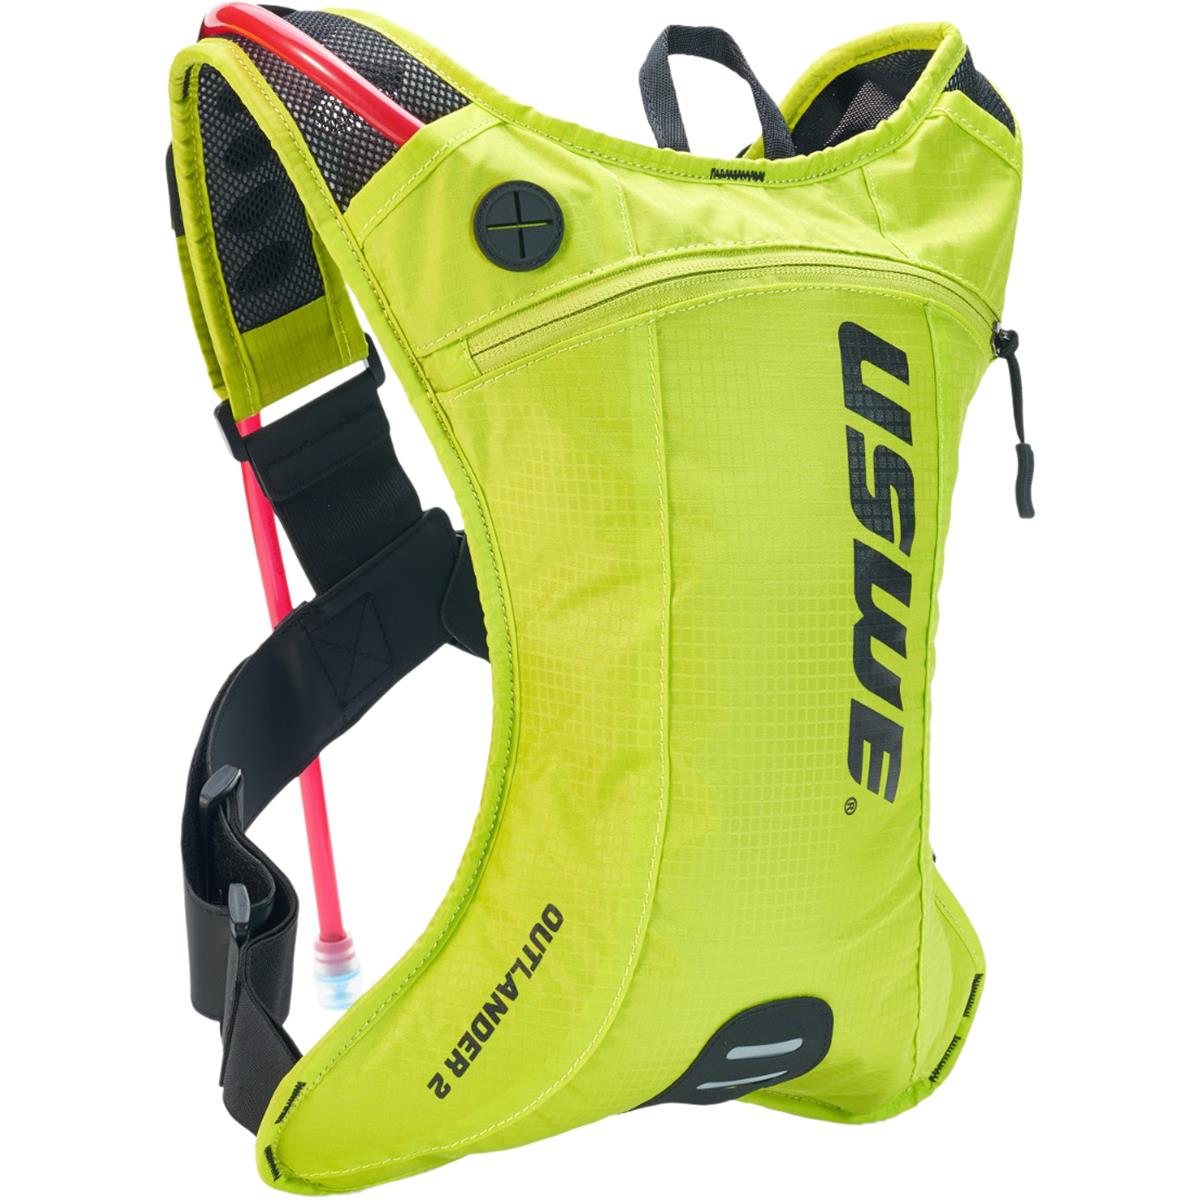 USWE Hydration Pack Outlander 2 Yellow